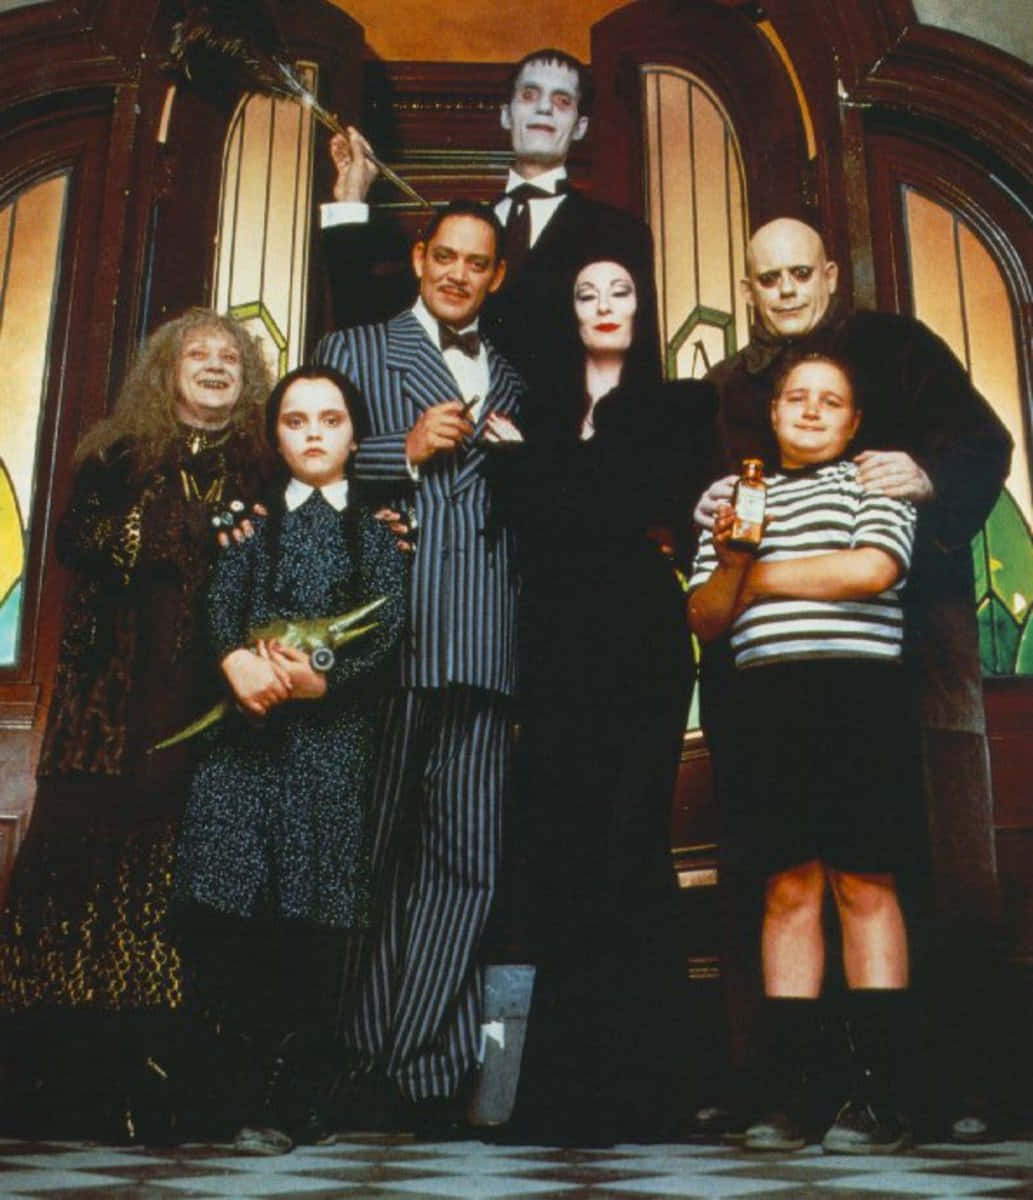 The Addams Family posing together